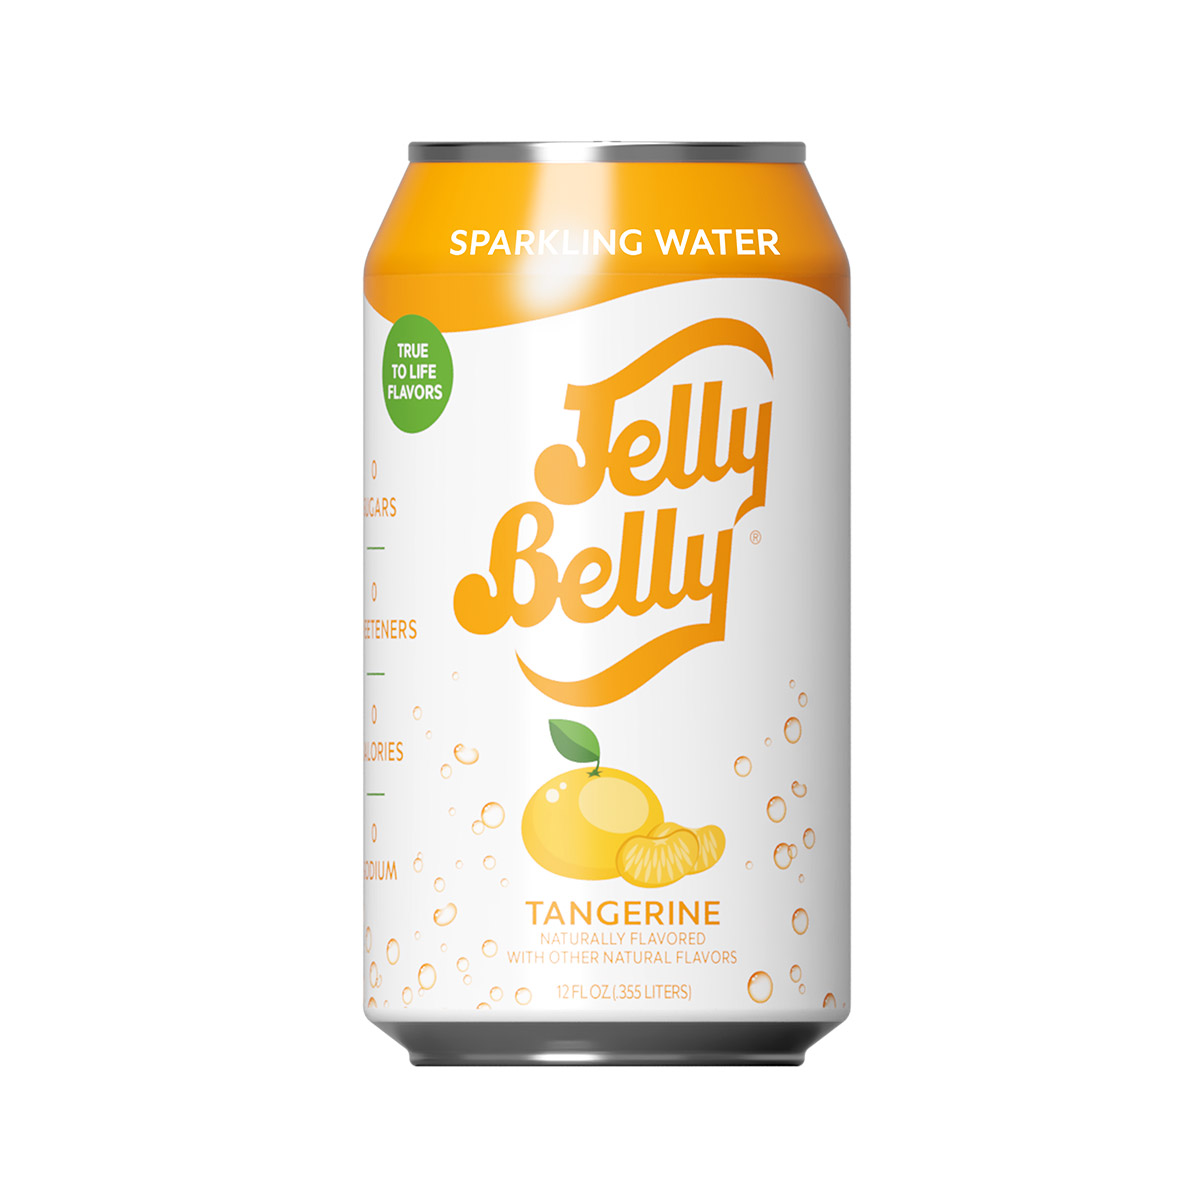 tangerine jelly belly sparkling water